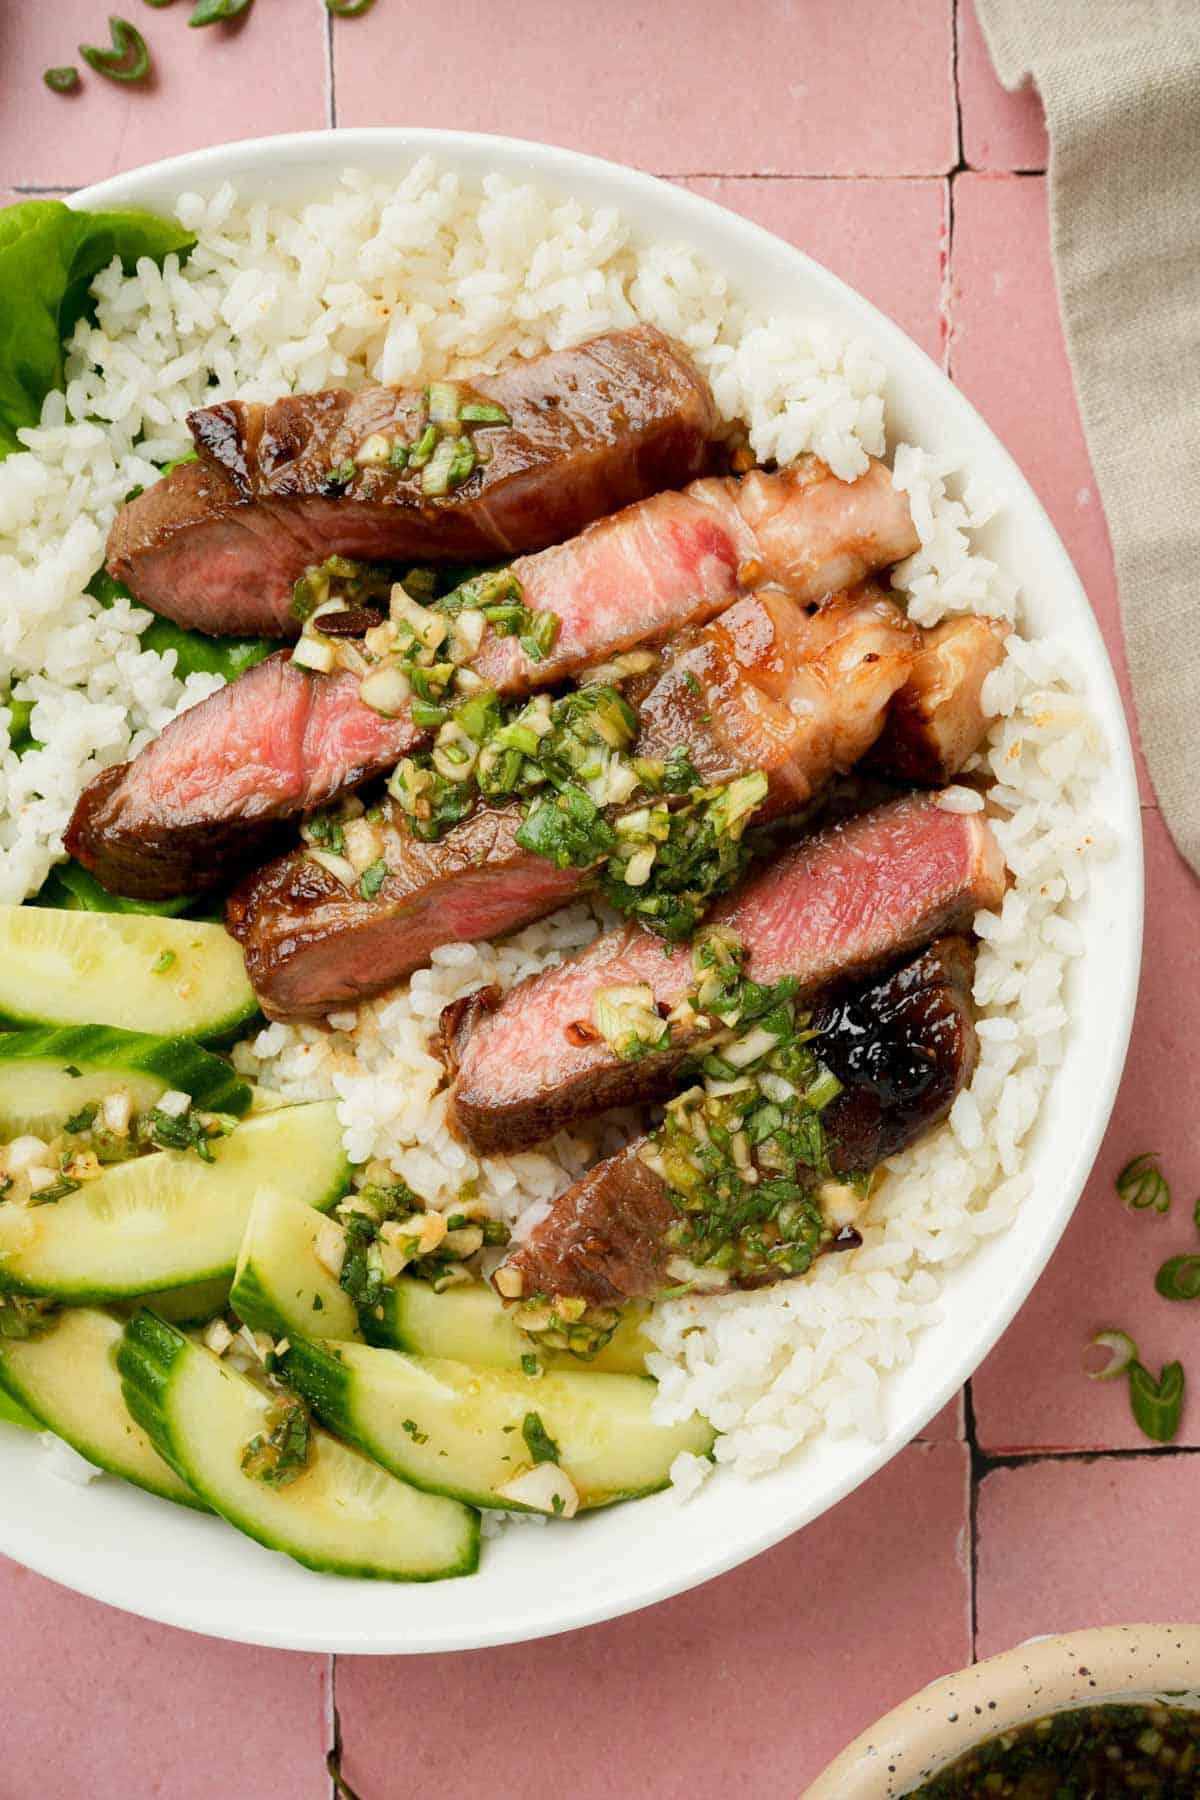 beef slices in a green sauce over rice